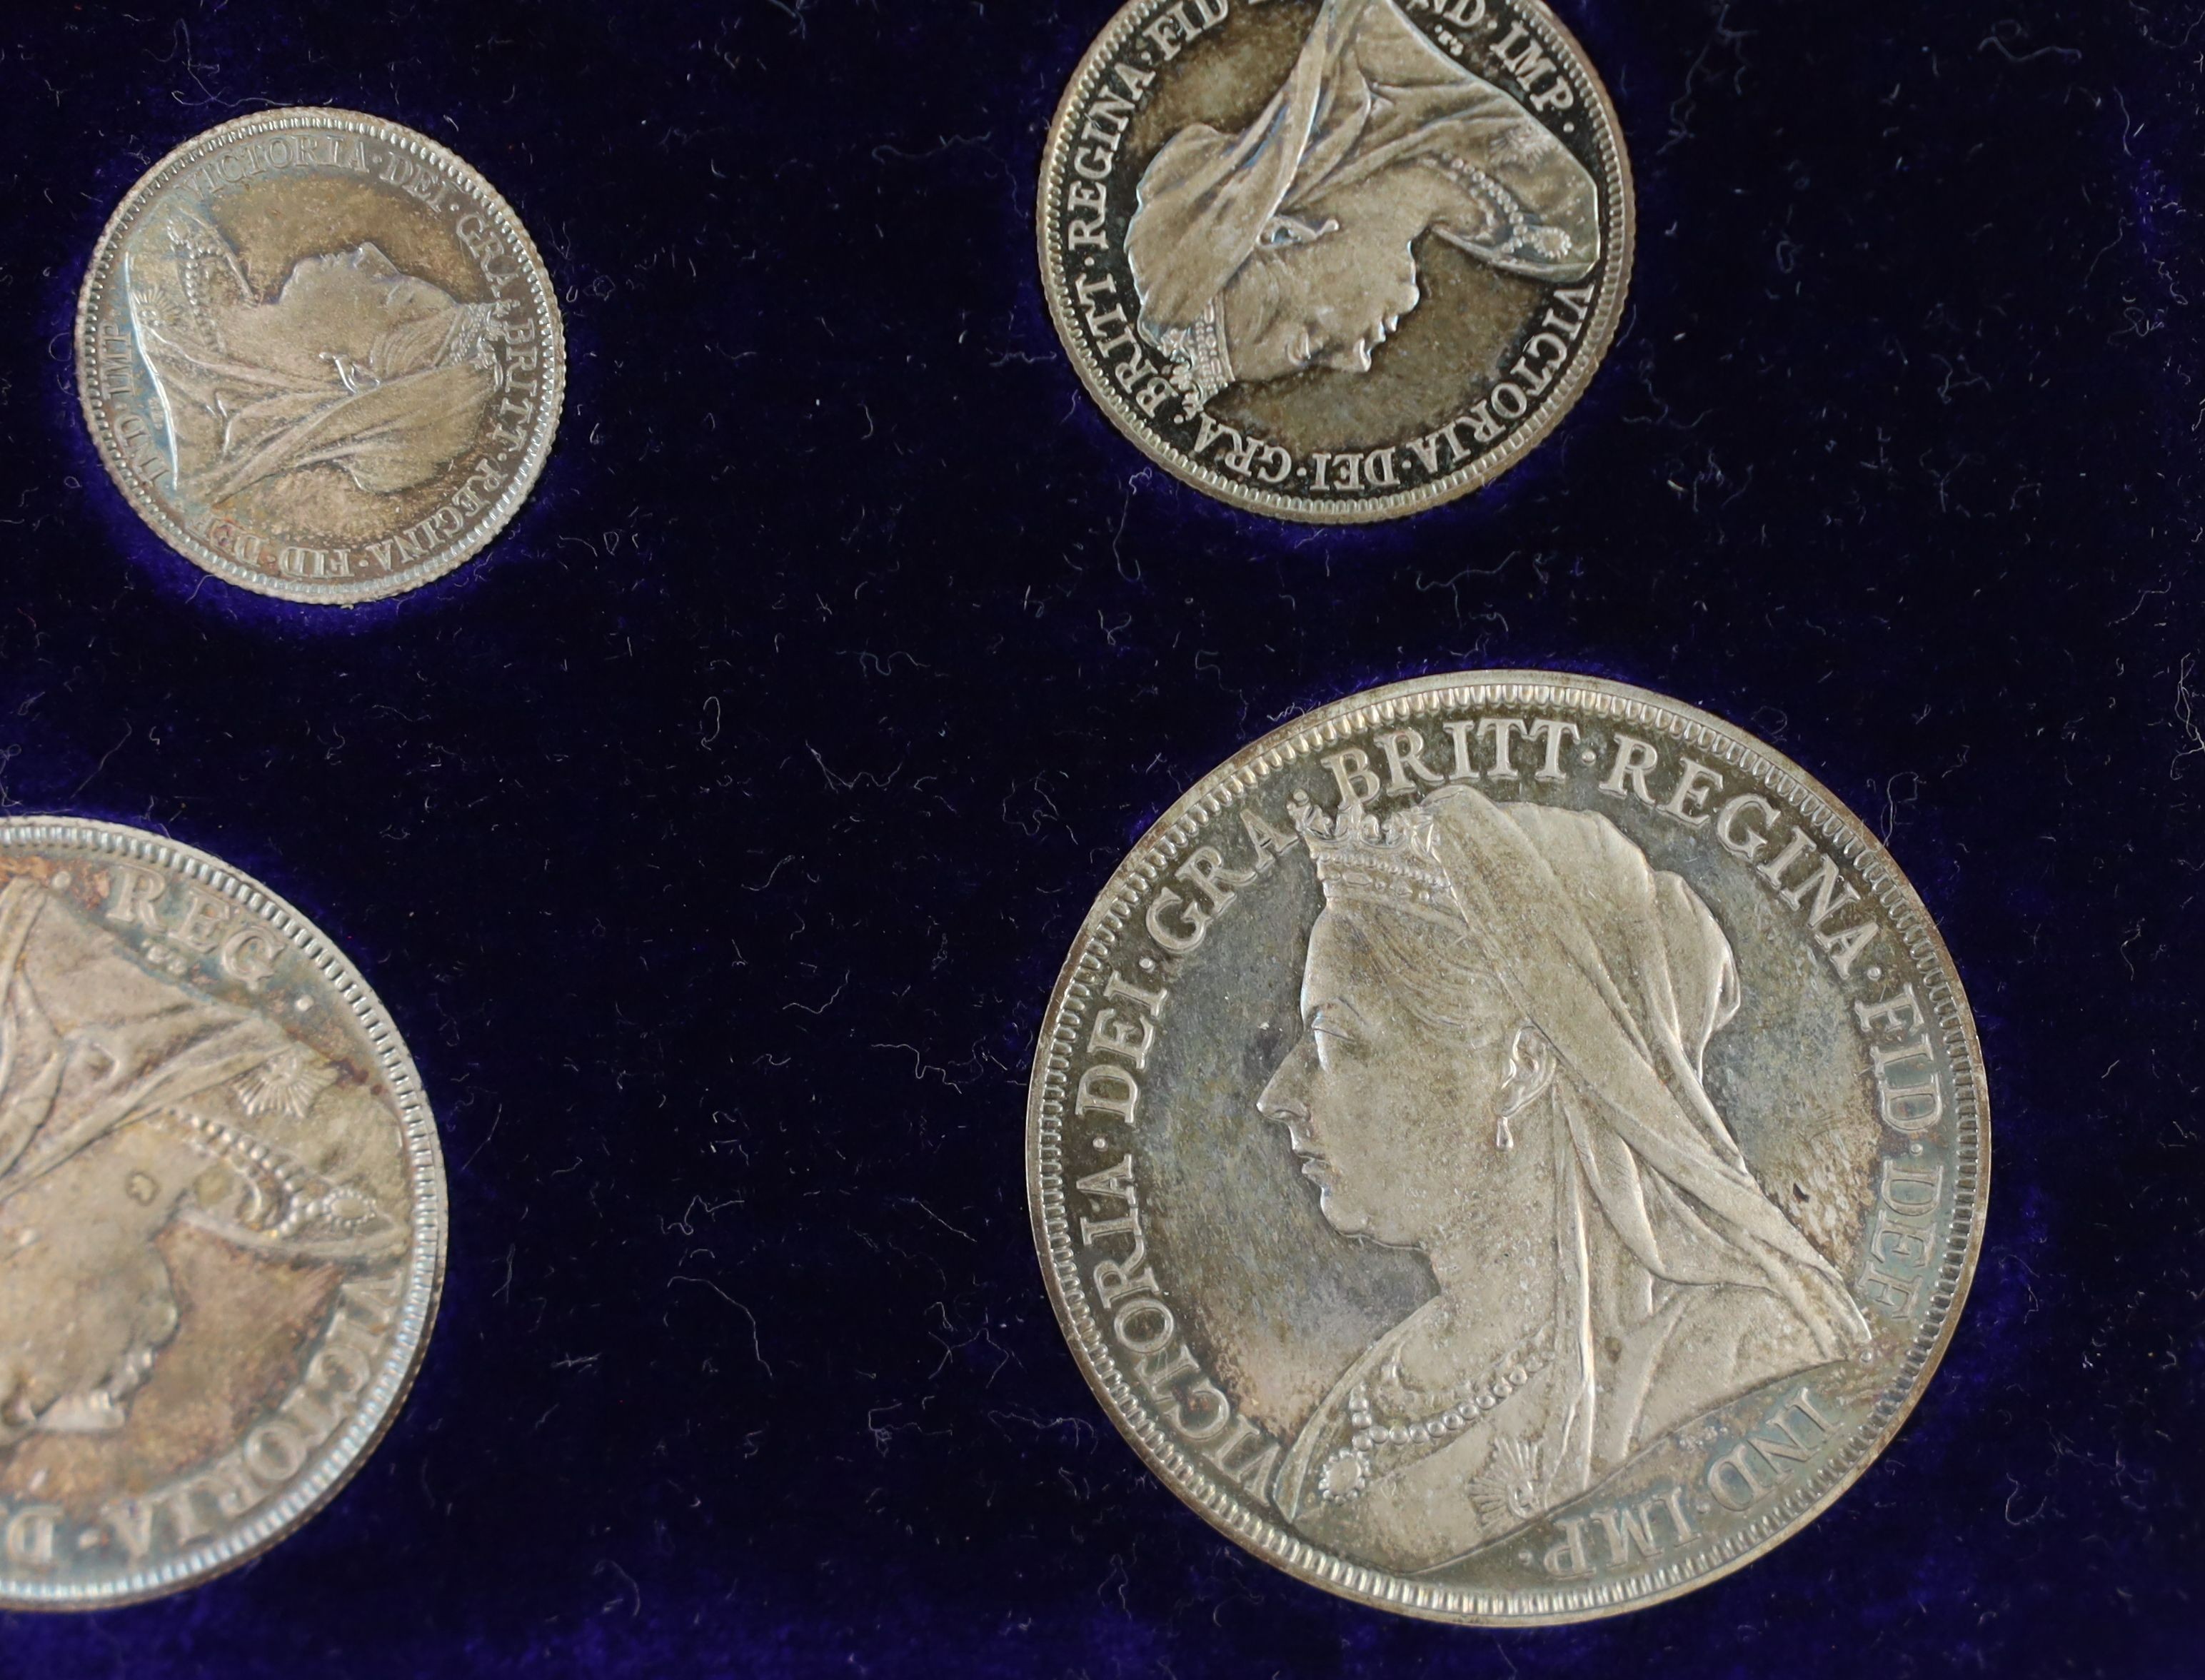 UK coins, a cased Victoria 1893 gold and silver proof coin set